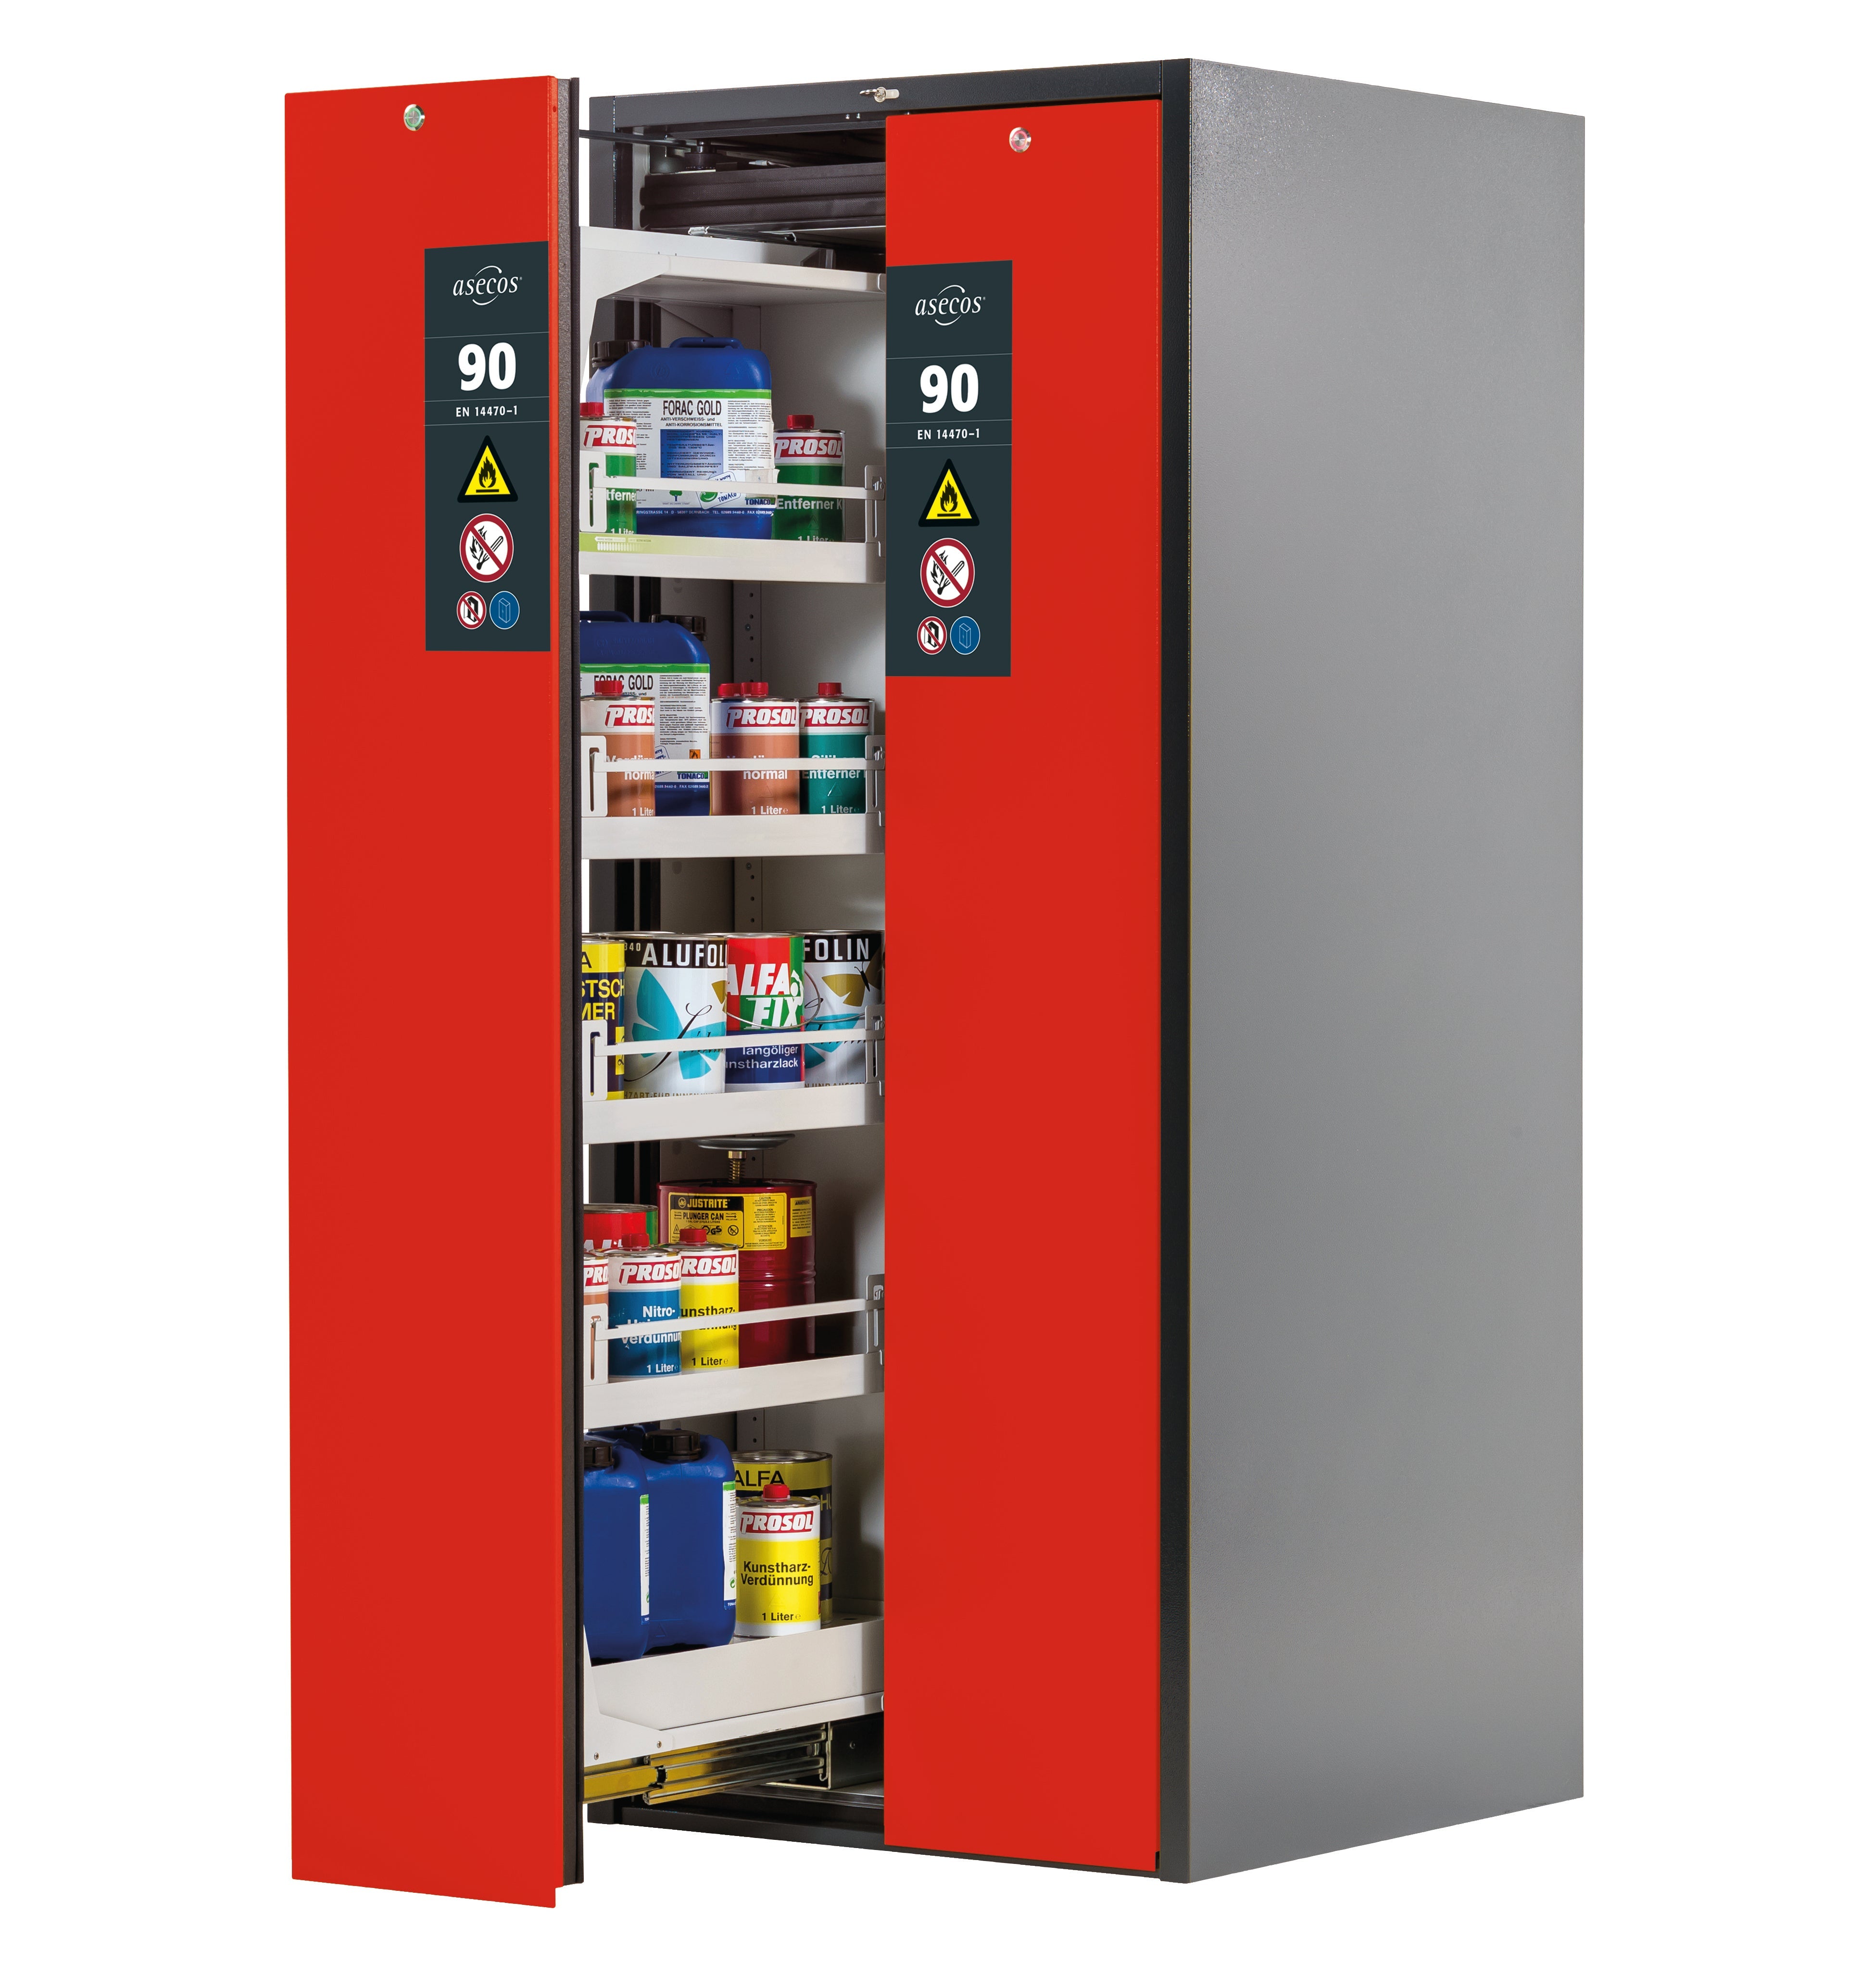 Type 90 safety cabinet V-MOVE-90 model V90.196.081.VDAC:0013 in traffic red RAL 3020 with 4x standard tray base (sheet steel)